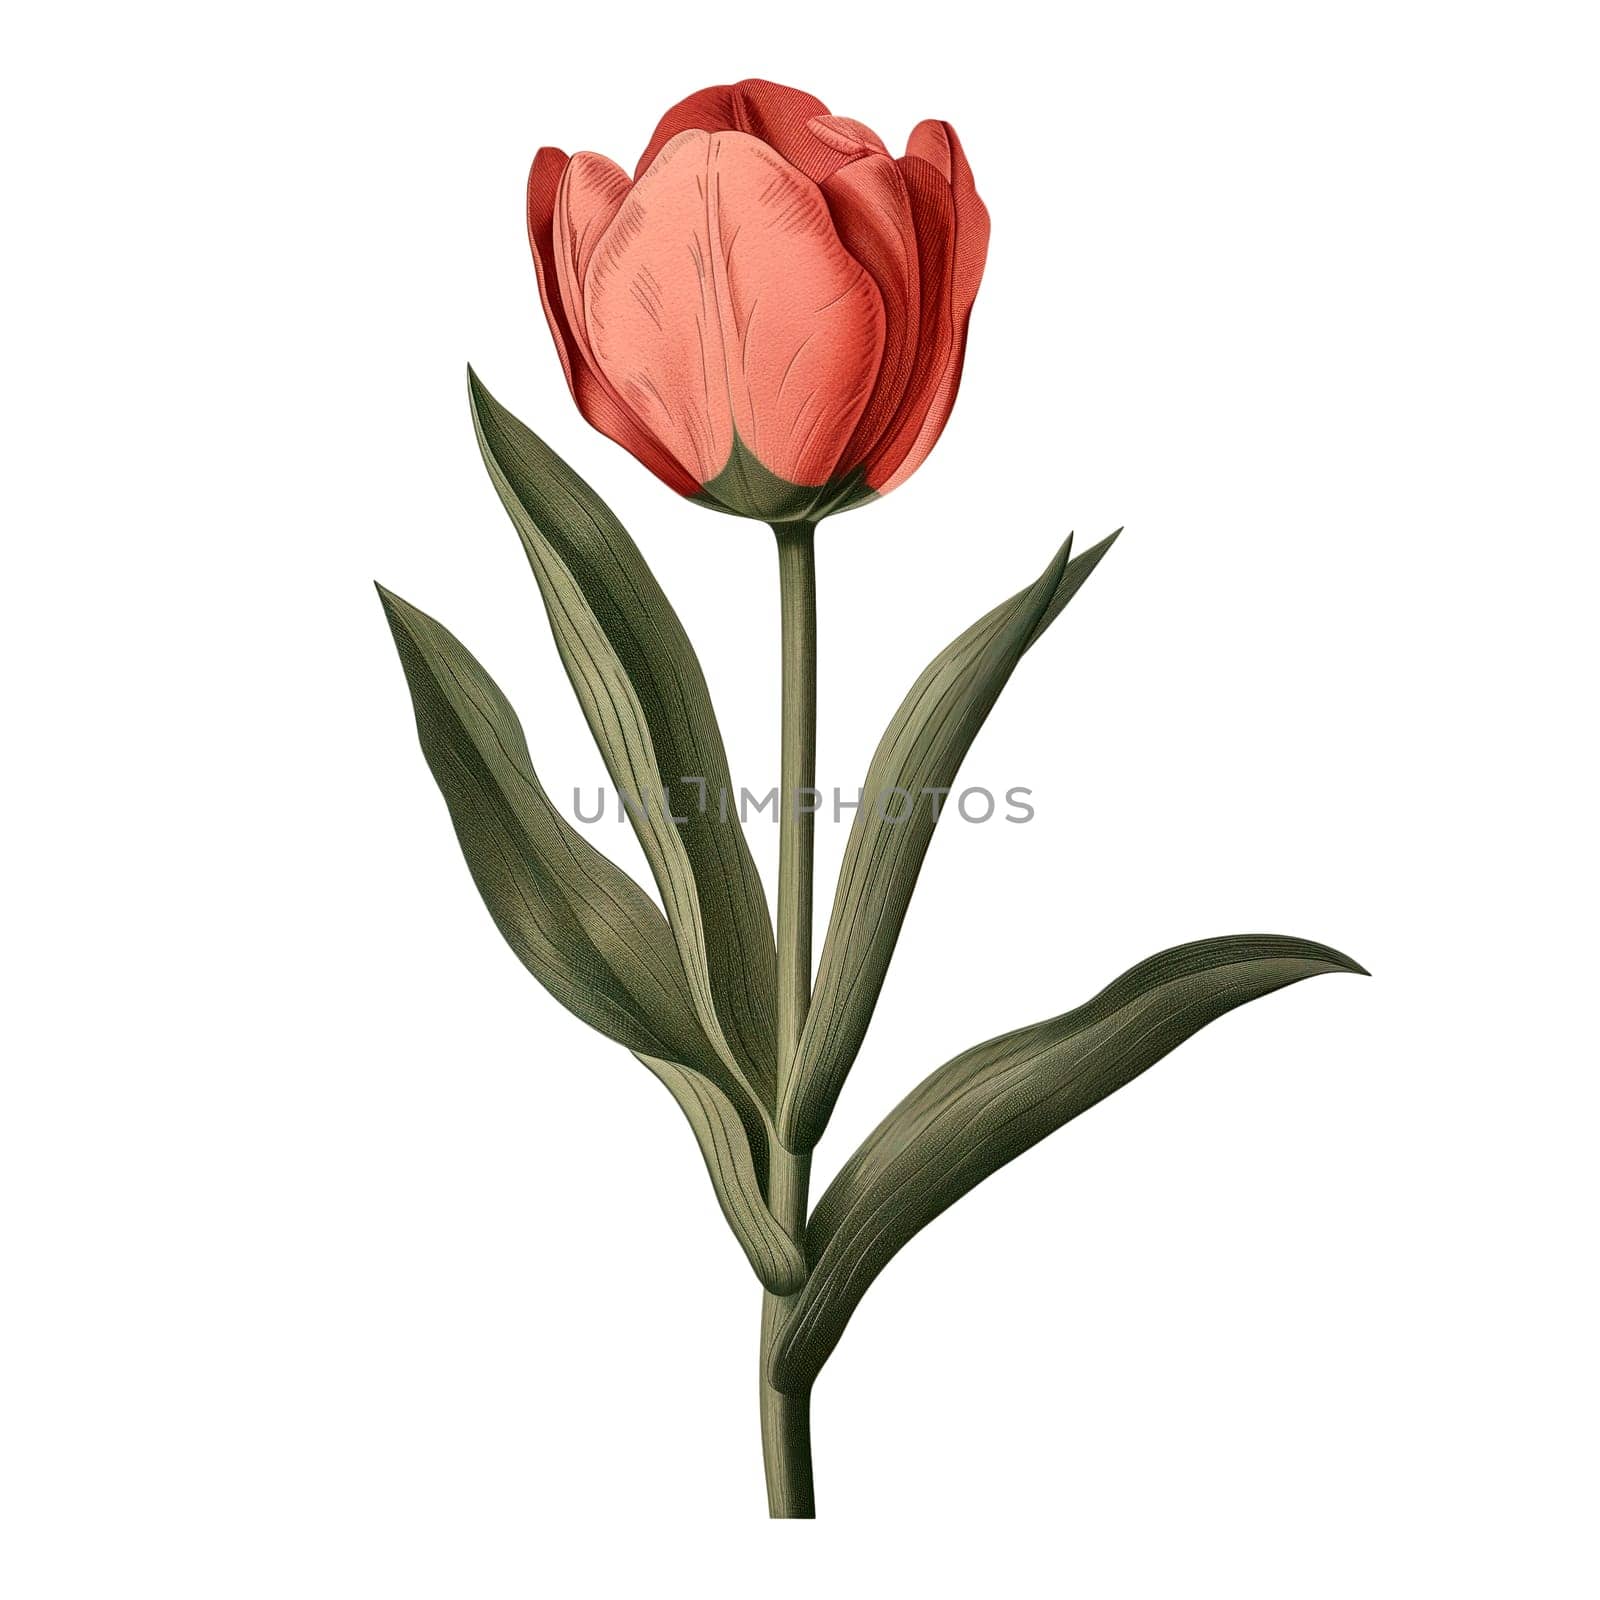 Isolated illustration of single red tulip by Dustick